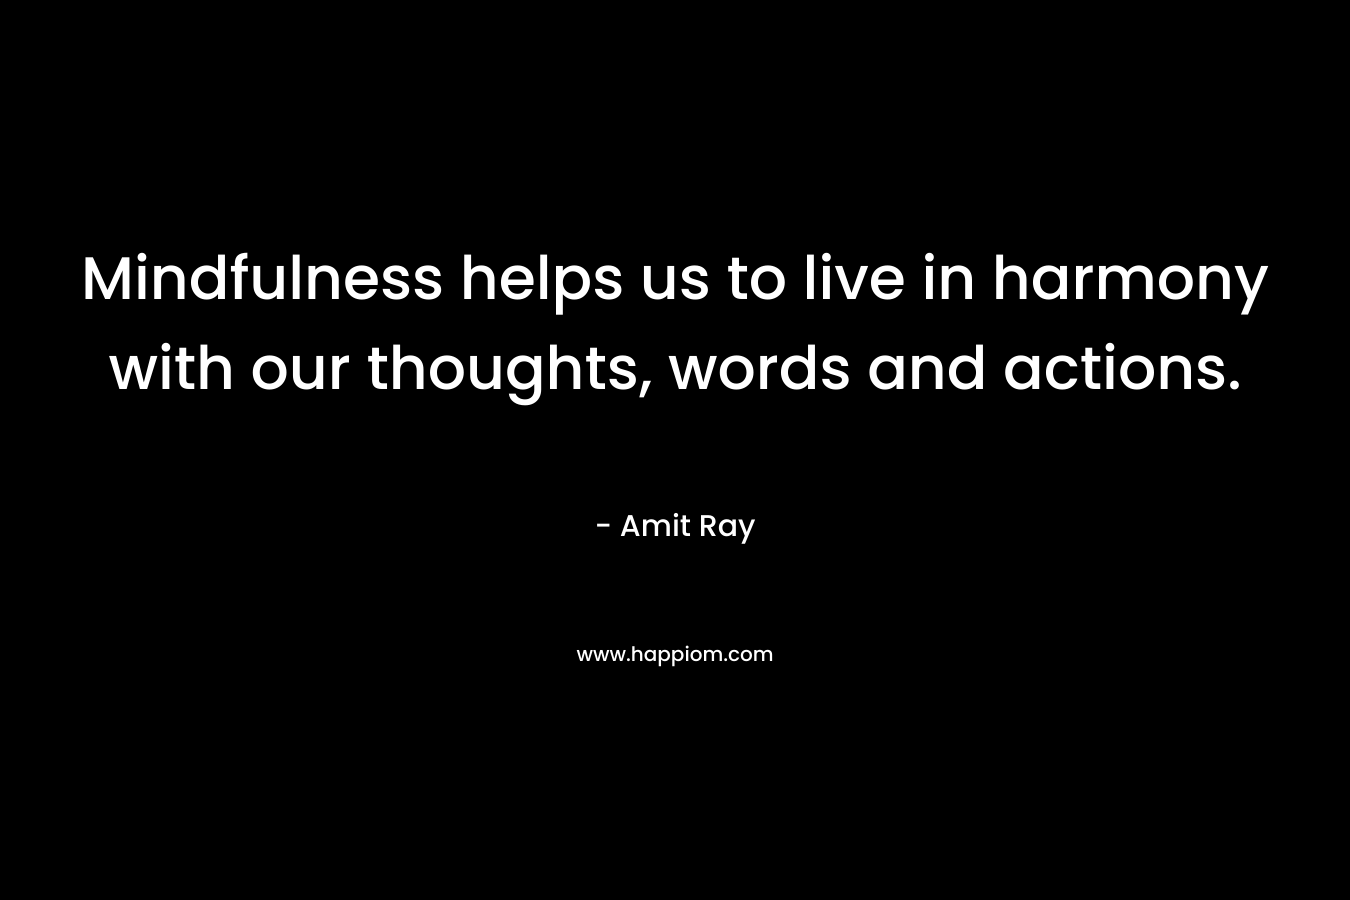 Mindfulness helps us to live in harmony with our thoughts, words and actions.